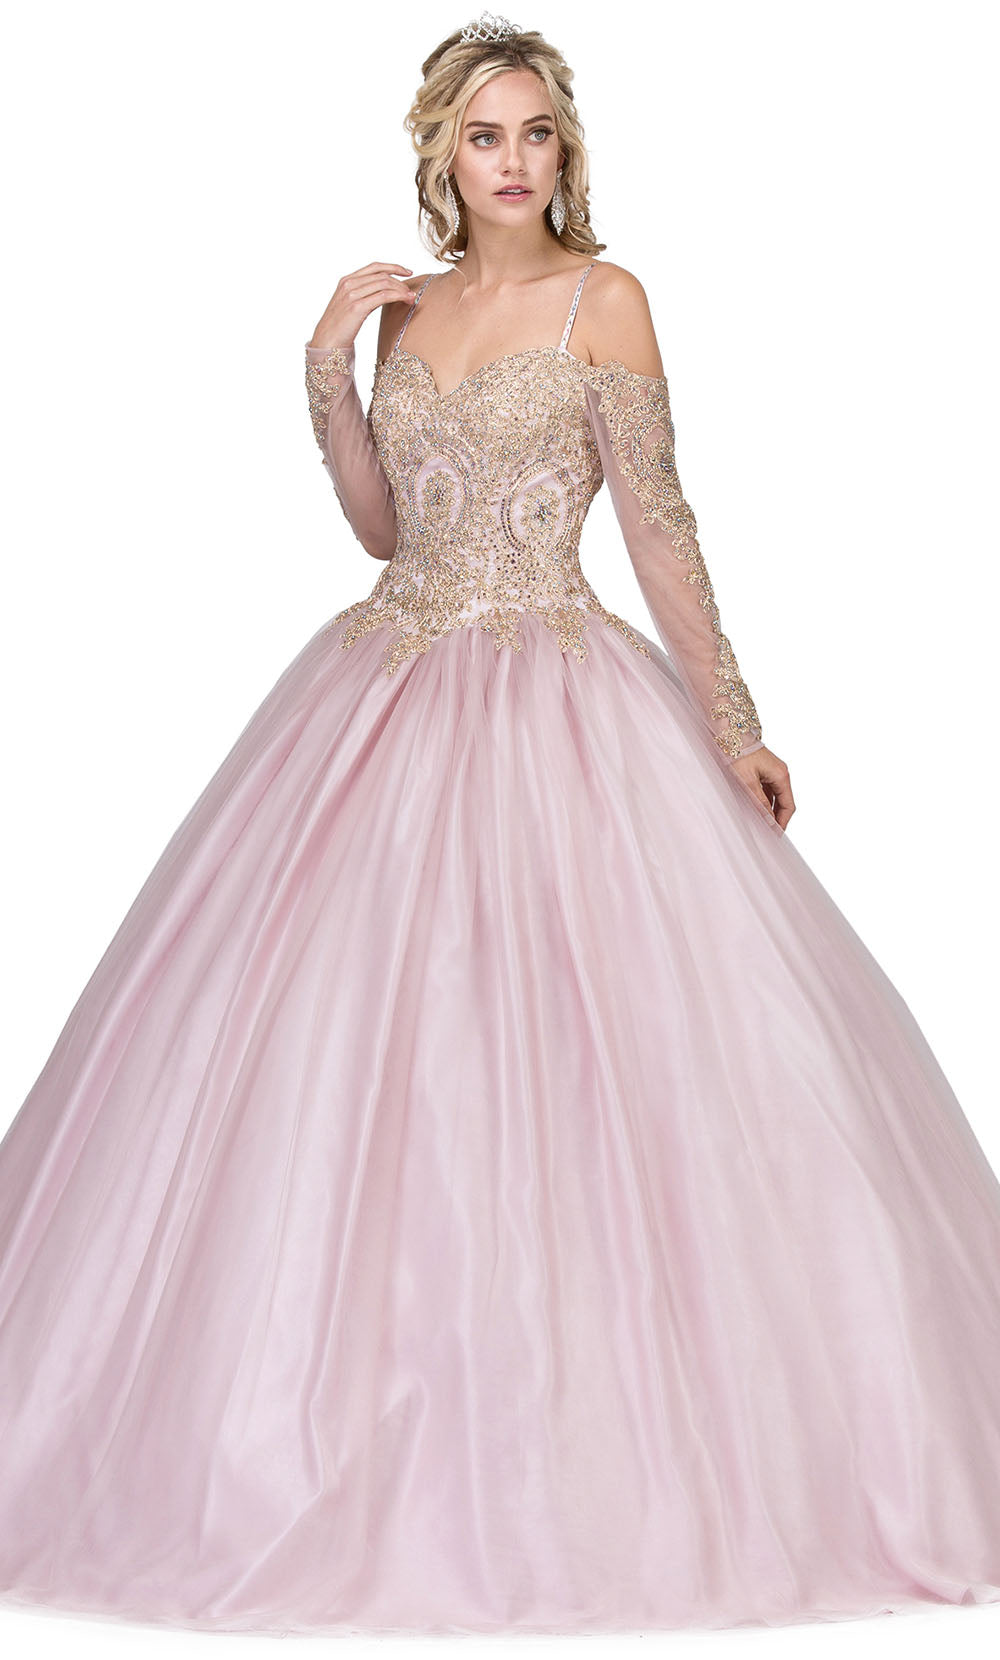 Dancing Queen - 1269 Embroidered Long Sleeve Off Shoulder Ballgown In Pink